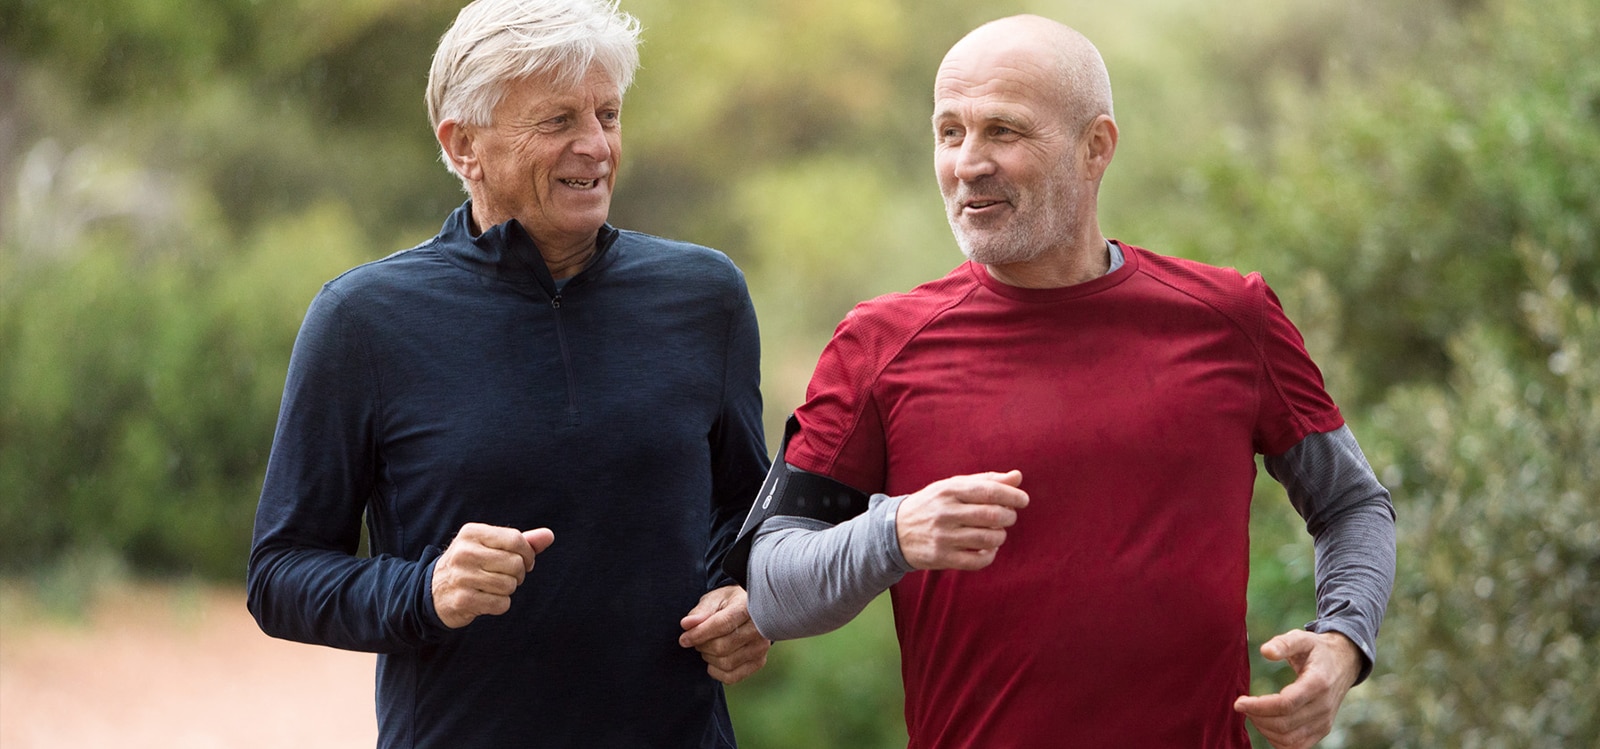 Two men in their 50-60s, out jogging